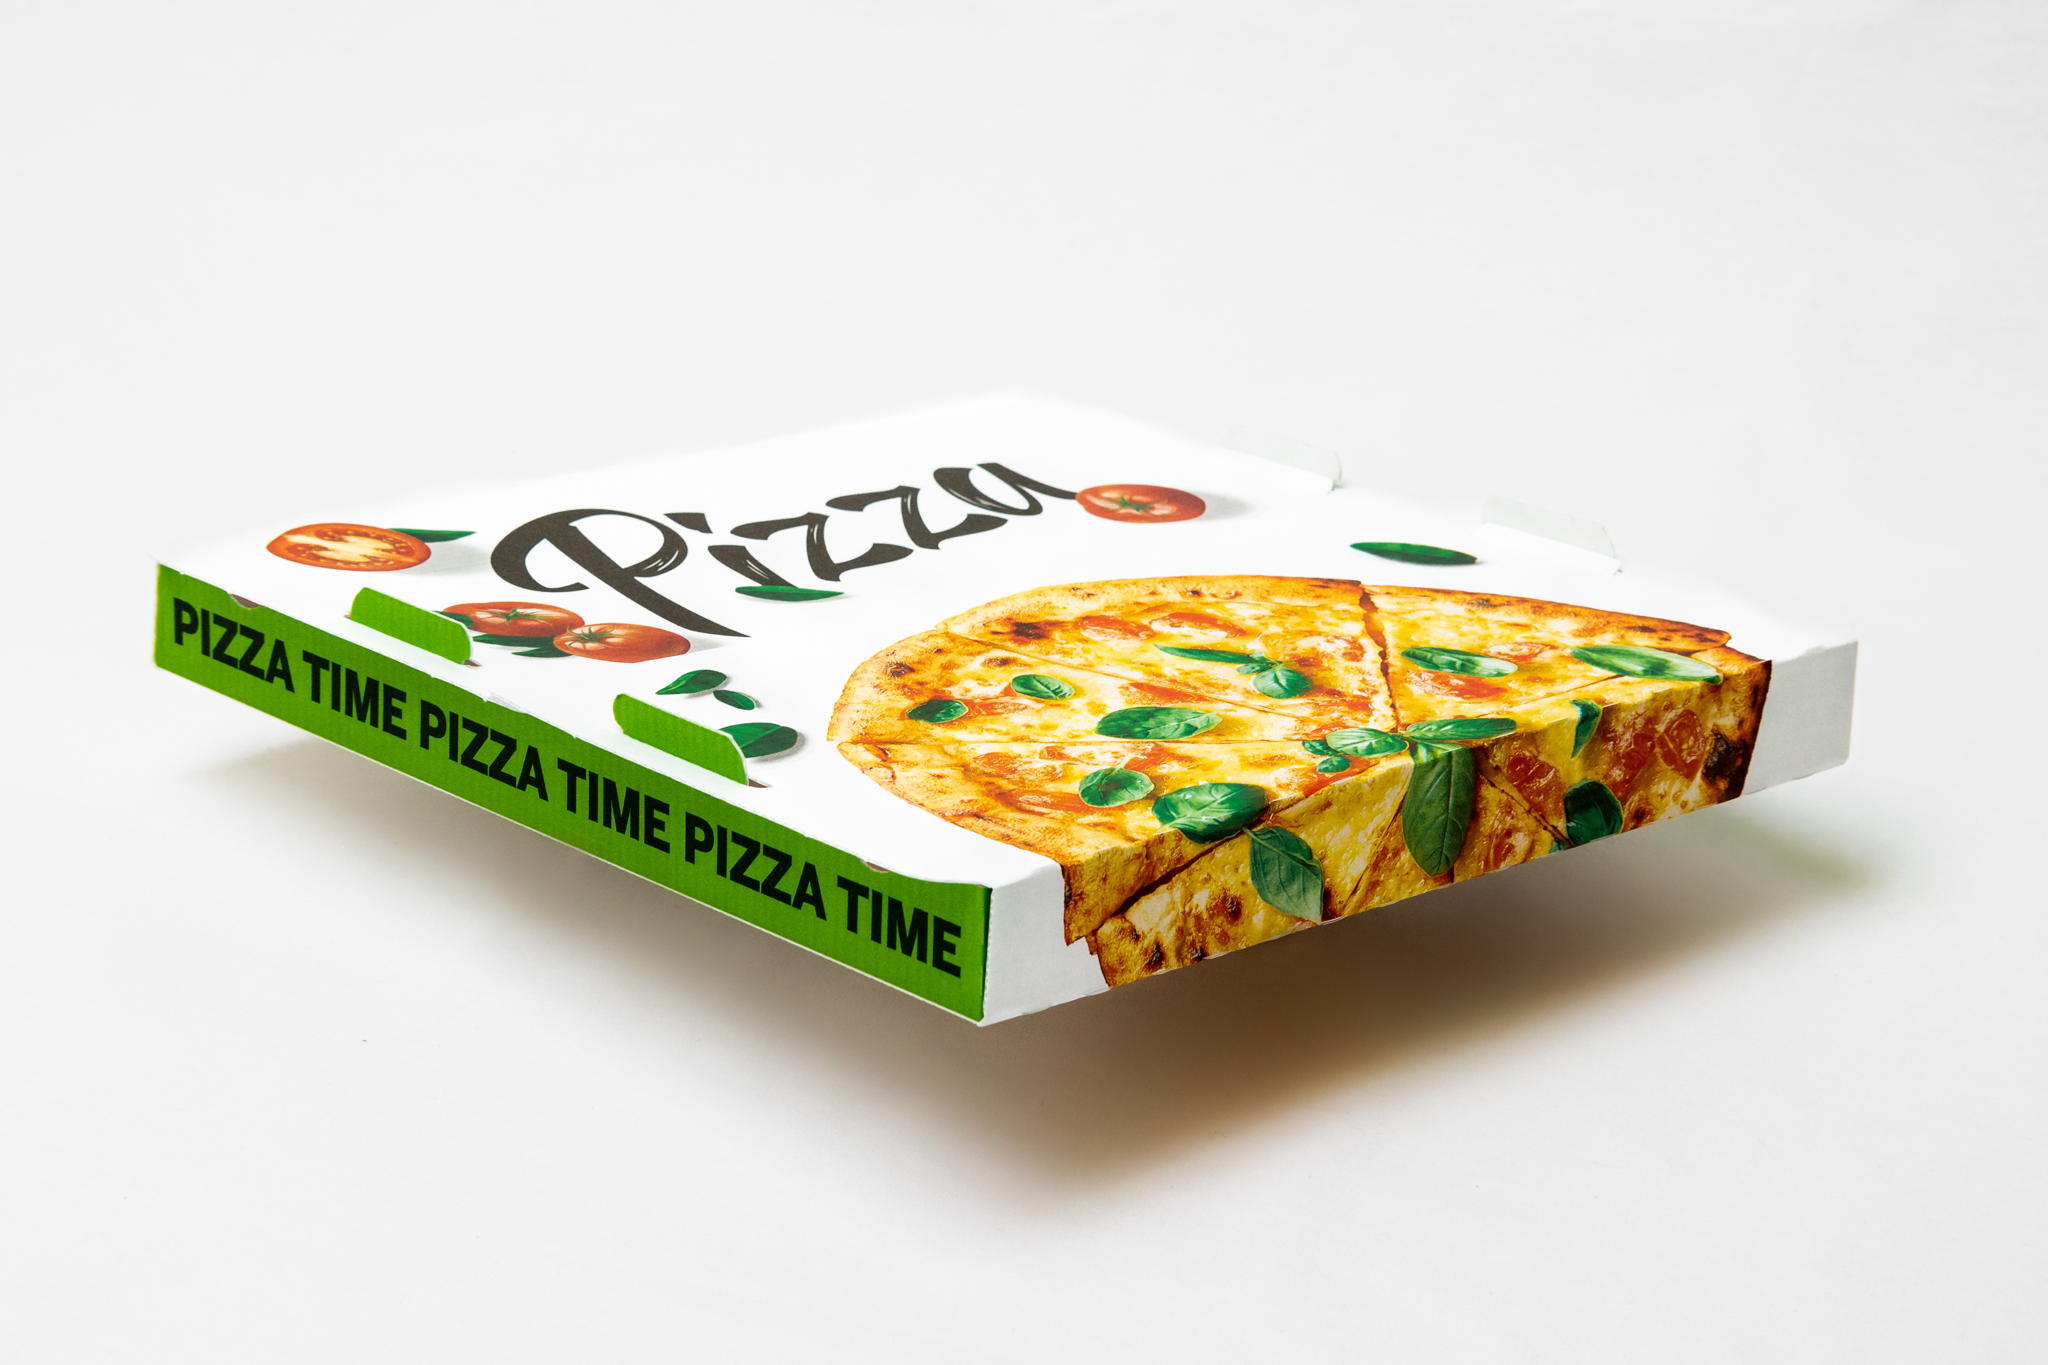 MetsäBoard Releases The World's Lightest Pizza Box